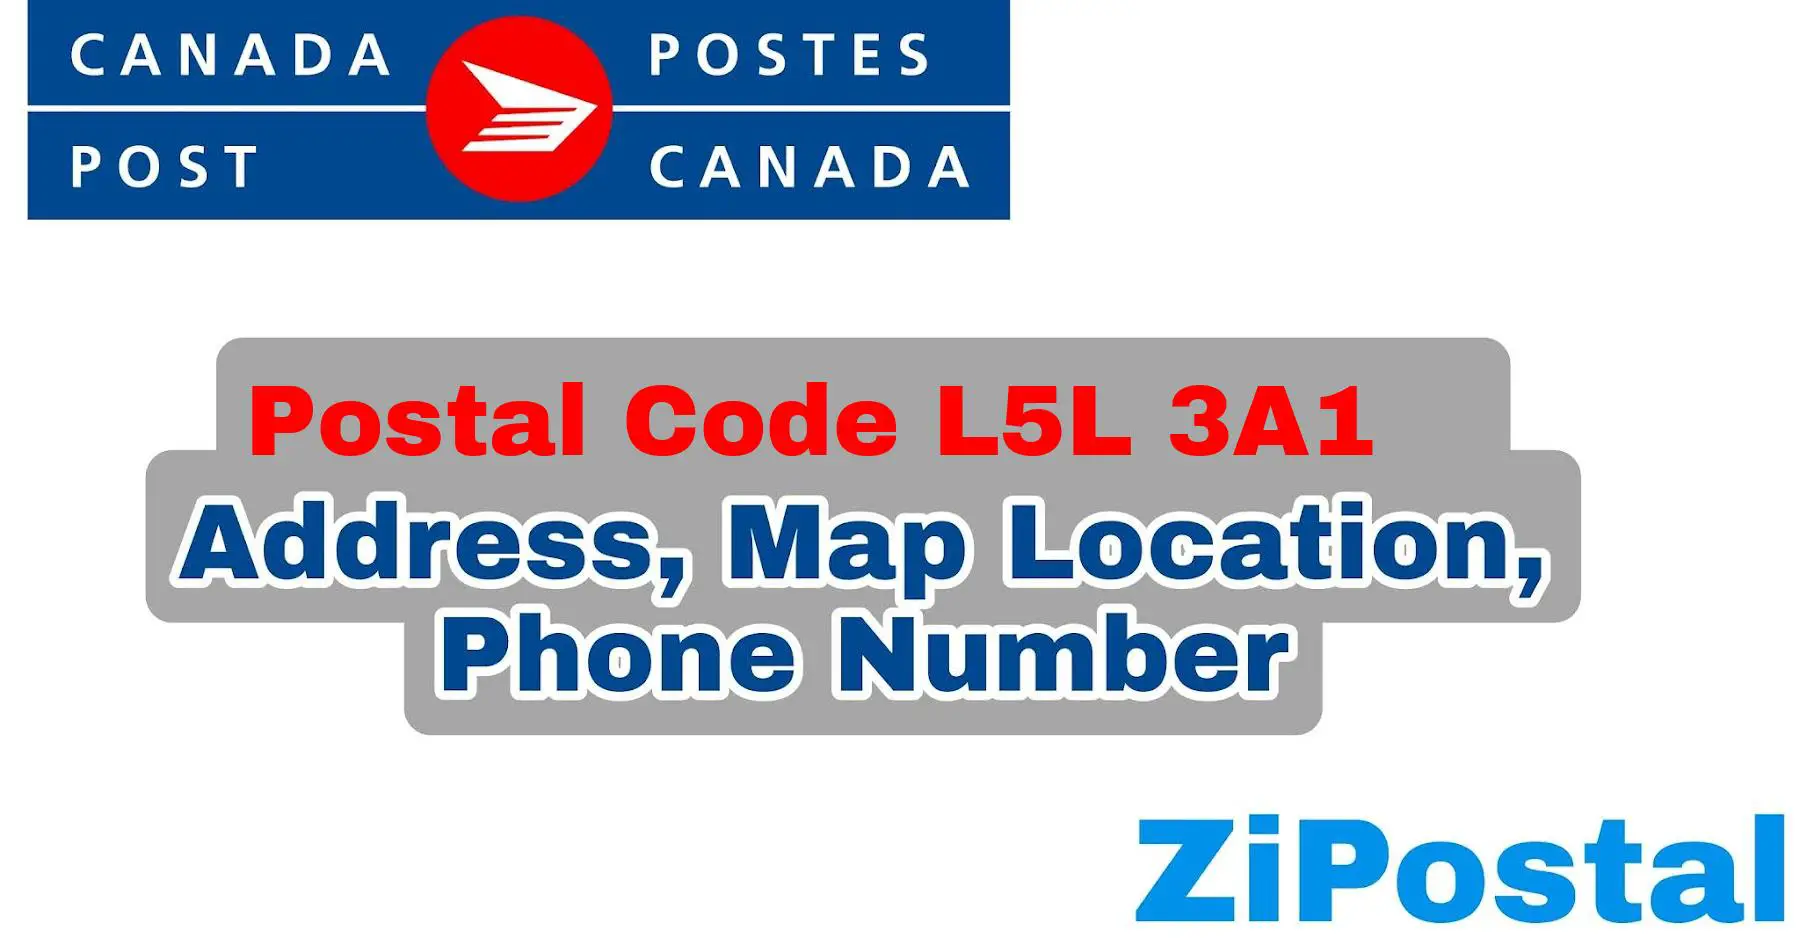 Postal Code L5L 3A1 Address Map Location and Phone Number